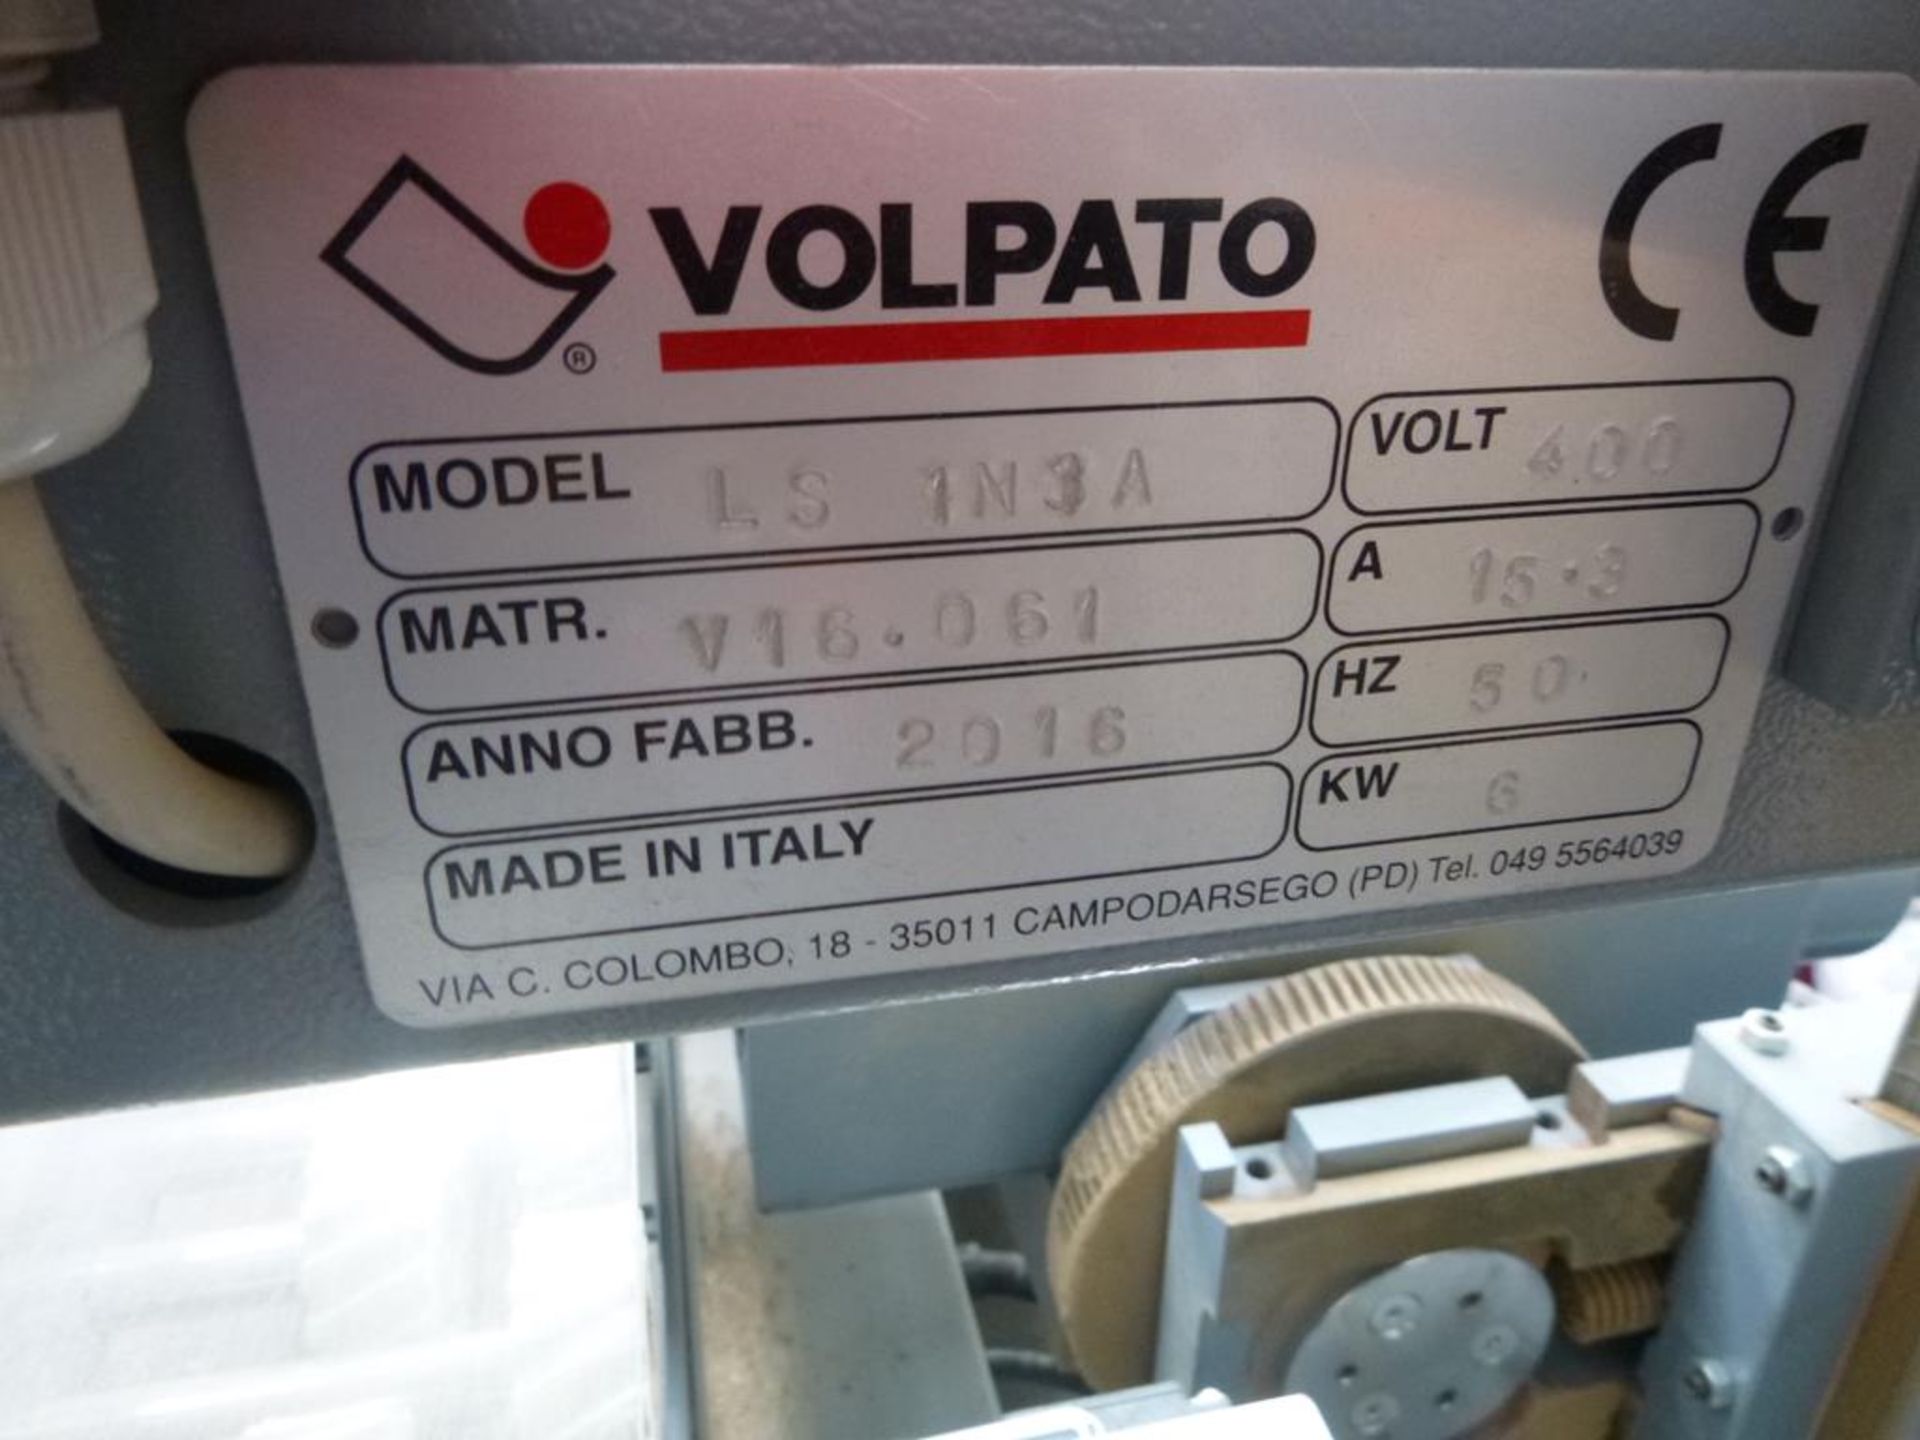 * Volpato LS1N Profile Sander. A 2016 Volpato Type LS1N-1-NA Profile Sander s/n V16-061-LS1N-1-NA - Image 5 of 8